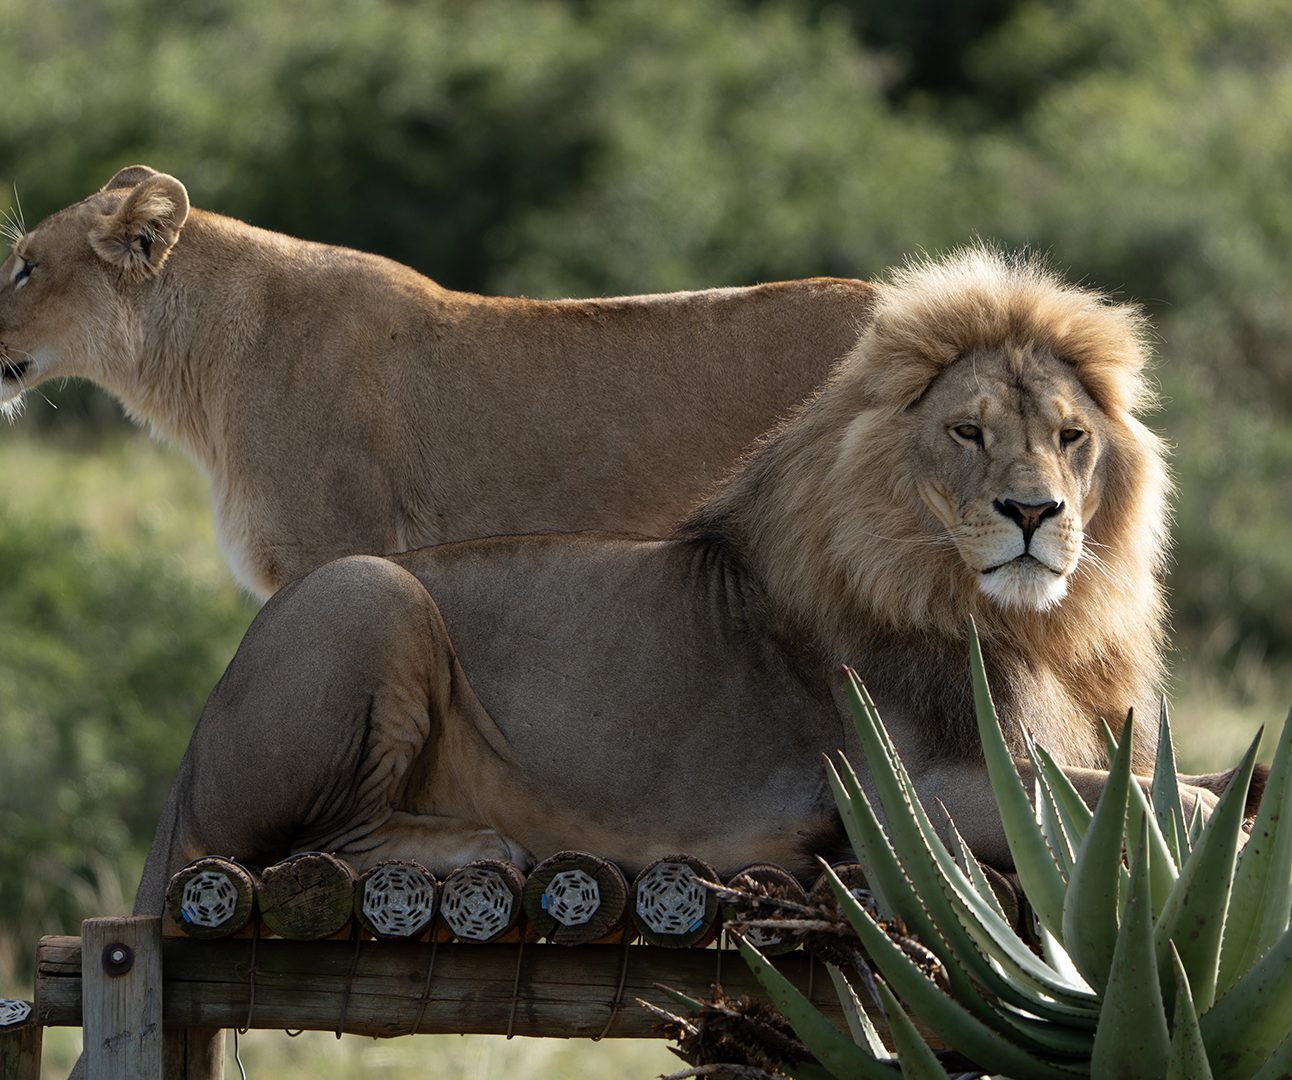 A male lion lies on a wooden platform with a female lion stood behind him